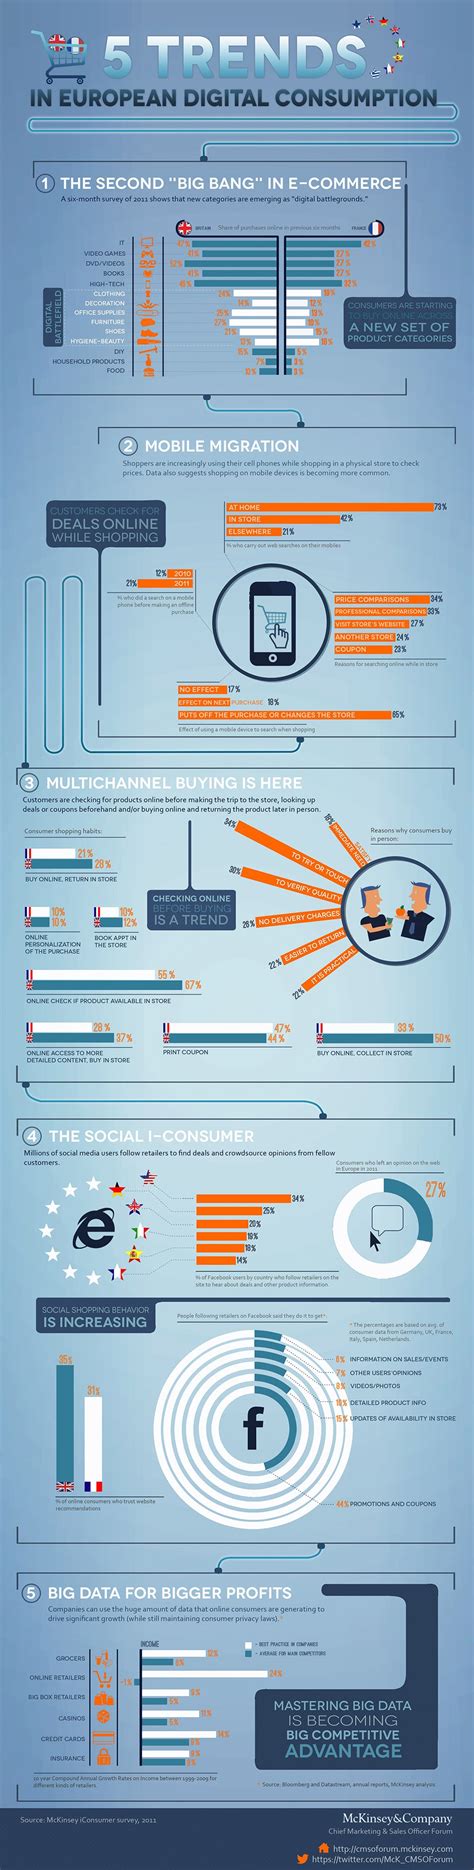 5 Trends Infographic Ecommerce Europe